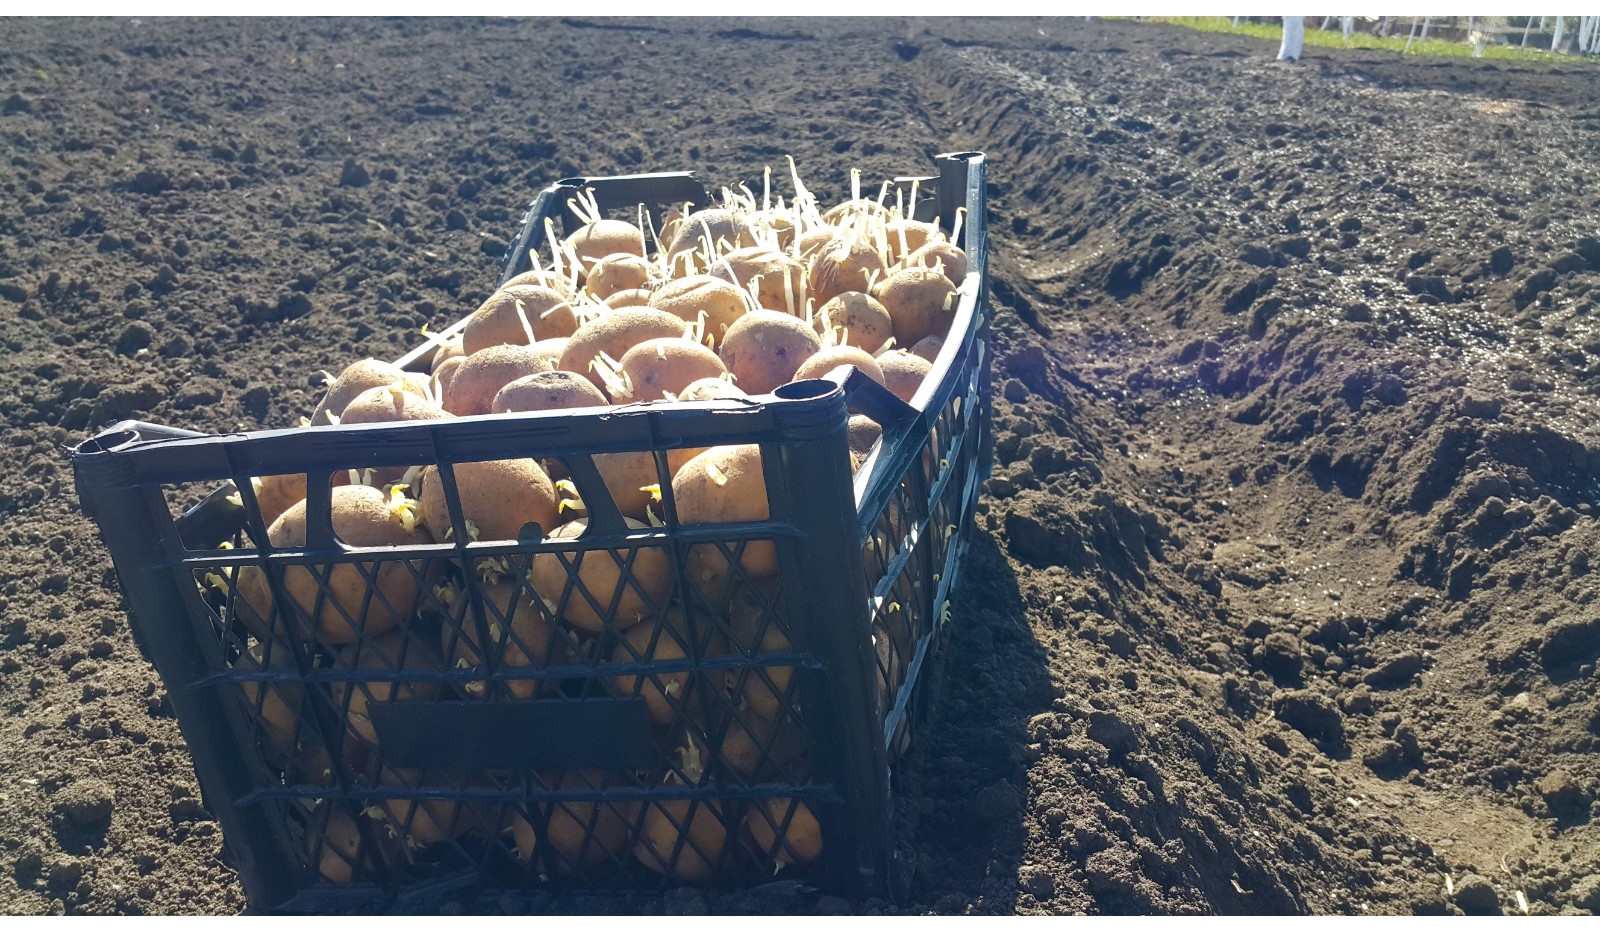 sprouted potatoes ready for planting